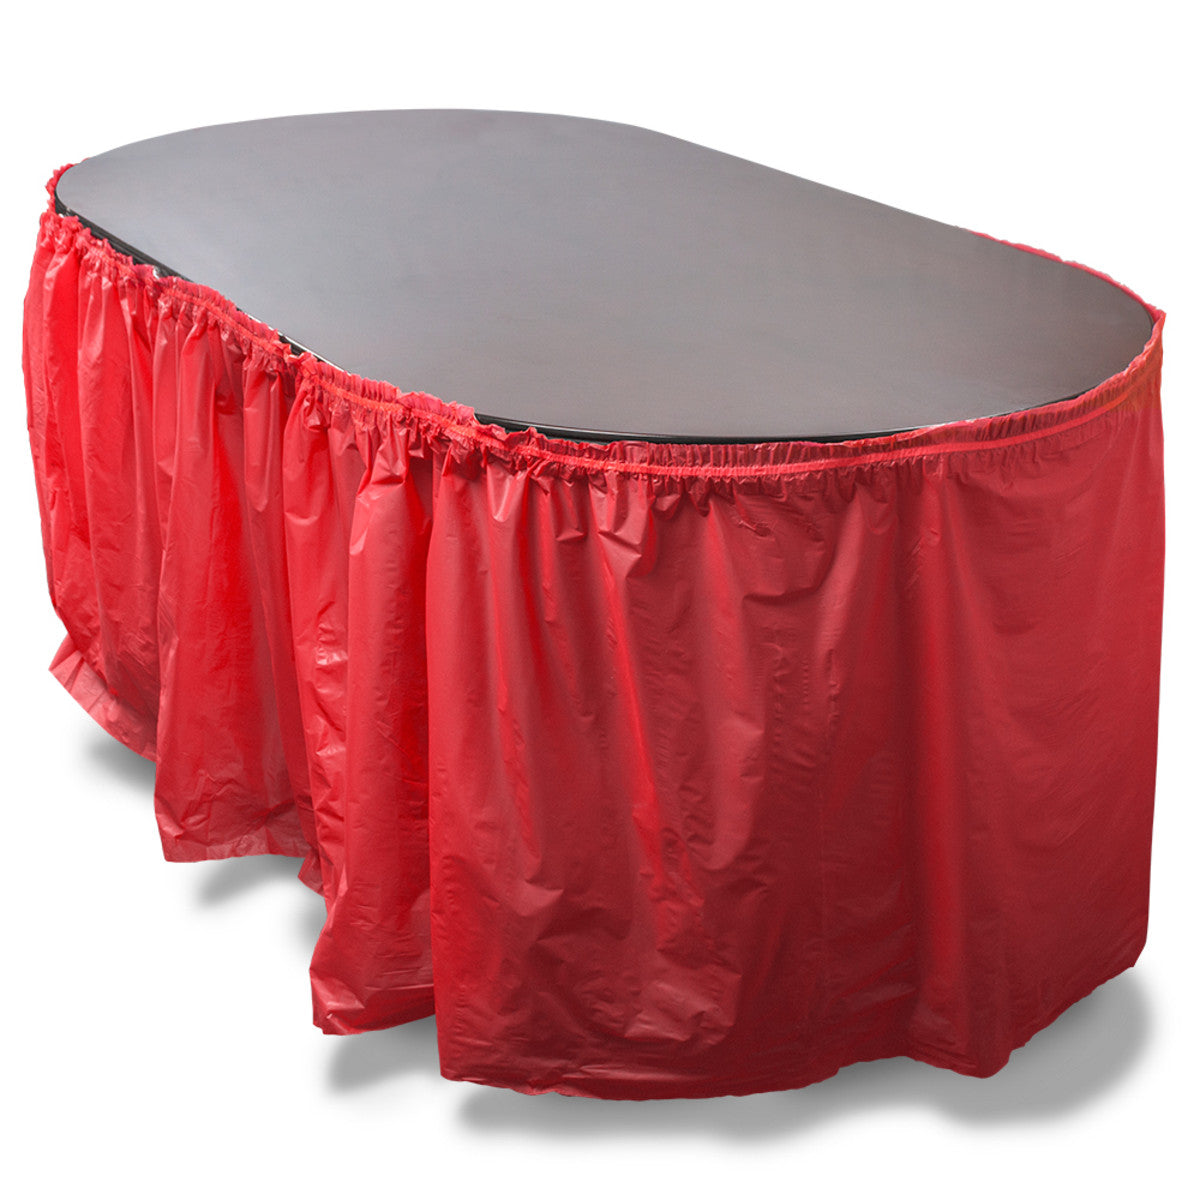 Plastic Table Skirt - 14 to 20-foot